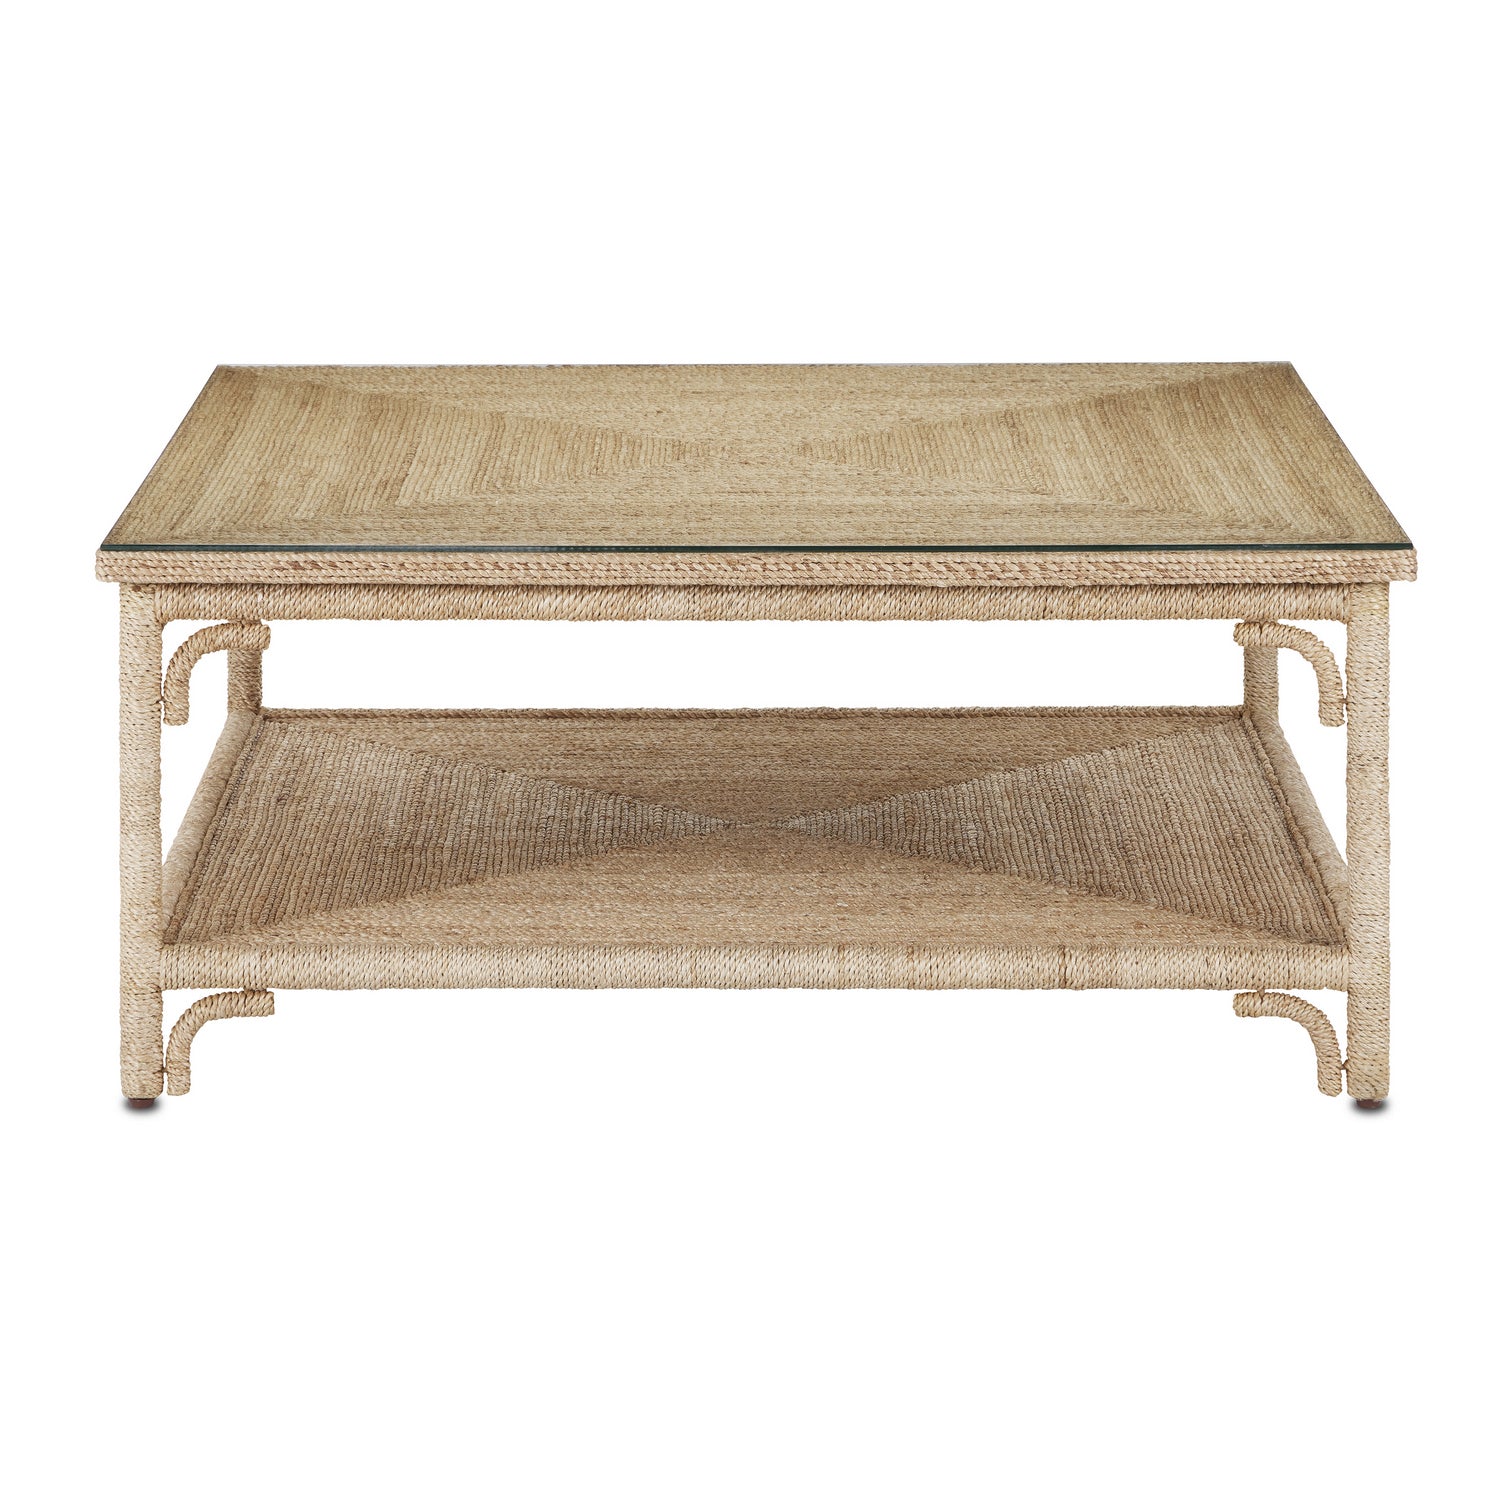 Cocktail Table from the Olisa collection in Natural/Clear finish